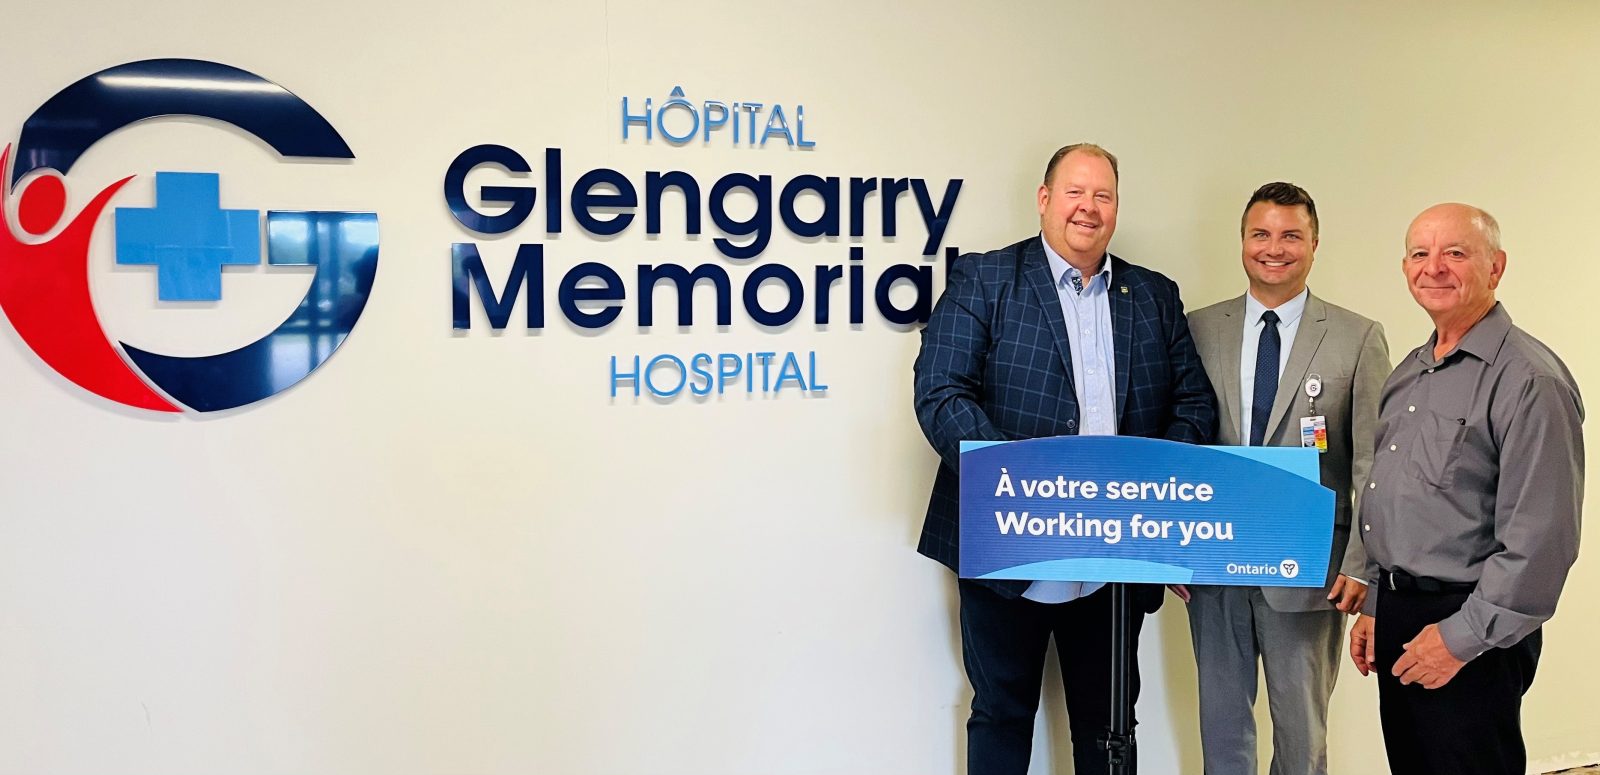 Hôpital Glengarry Memorial Hospital Receives $4.4 Million in Increased Funding from the Province